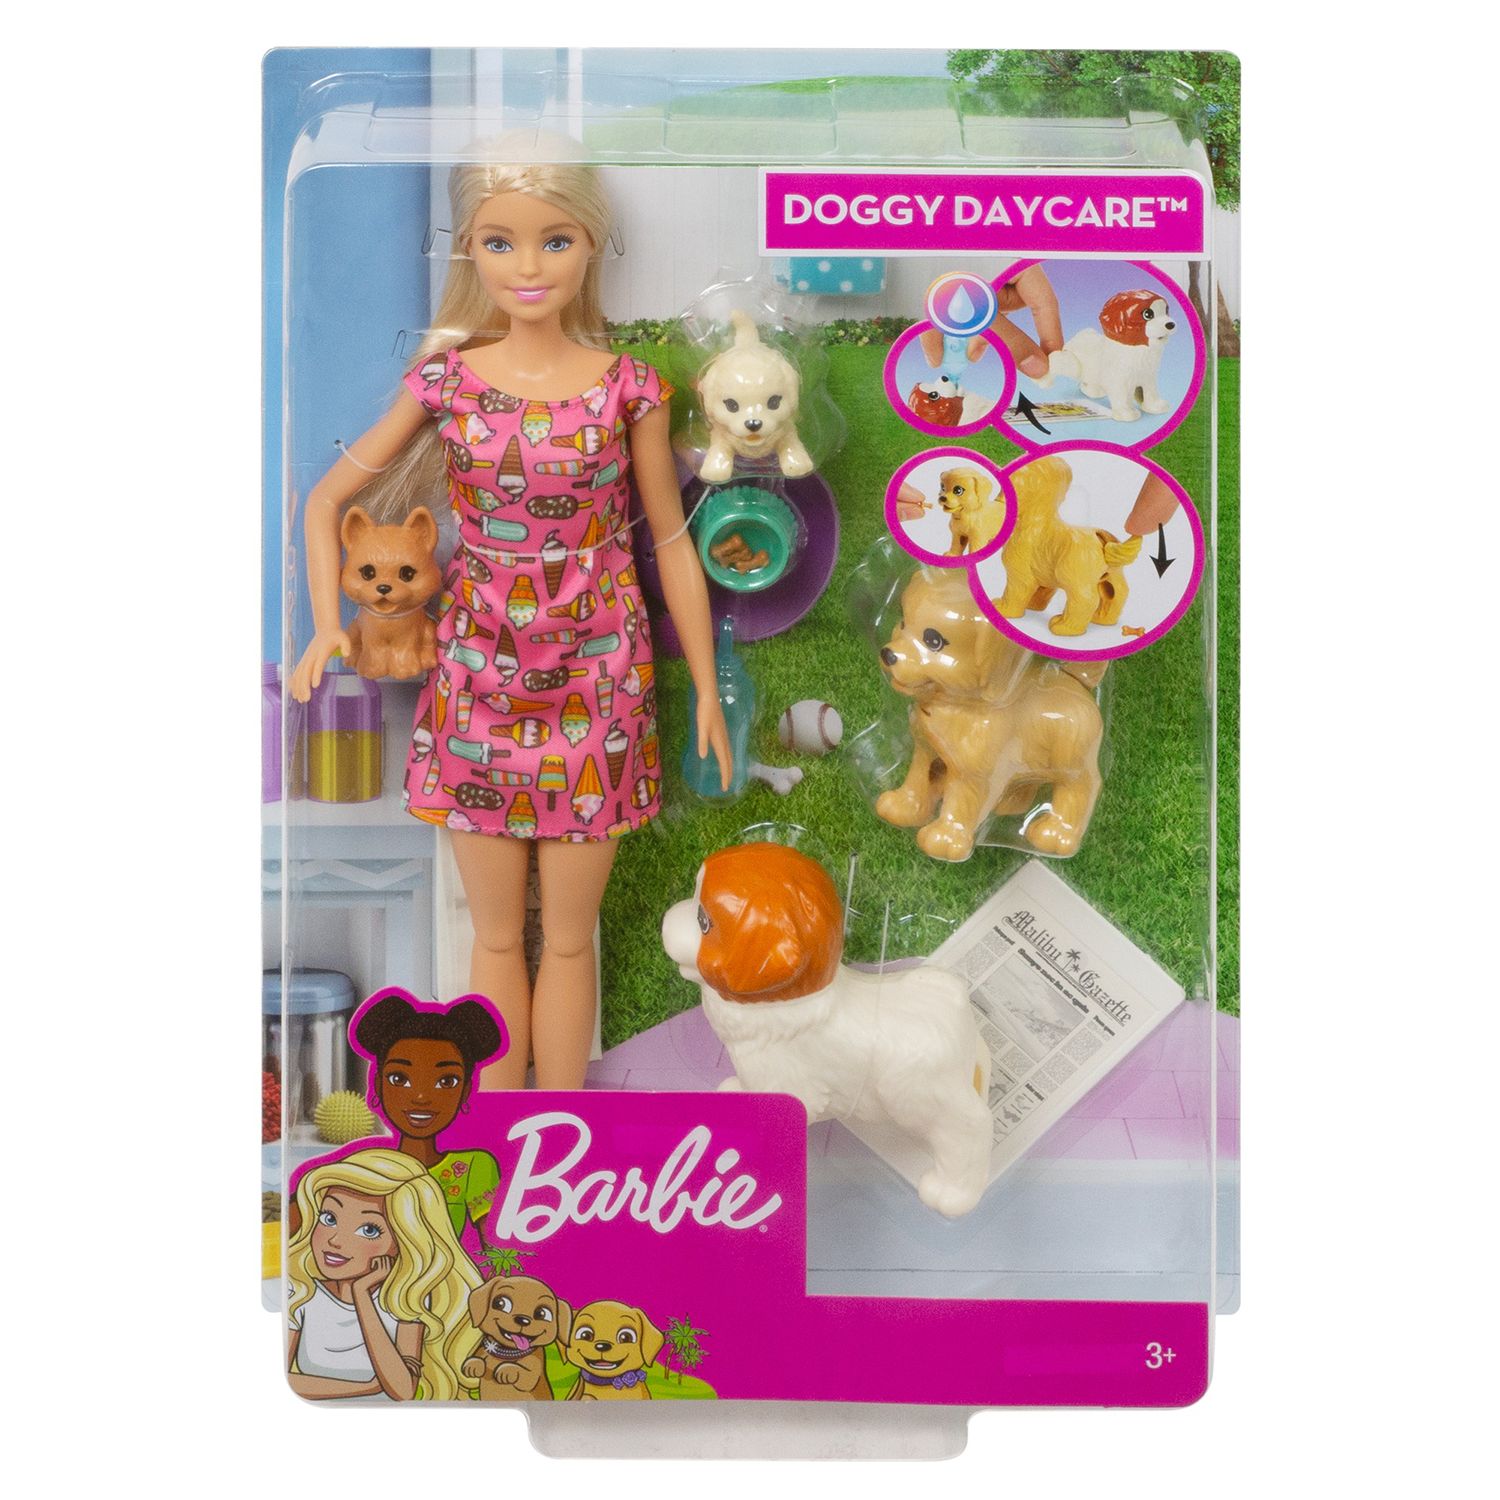 barbie and puppies